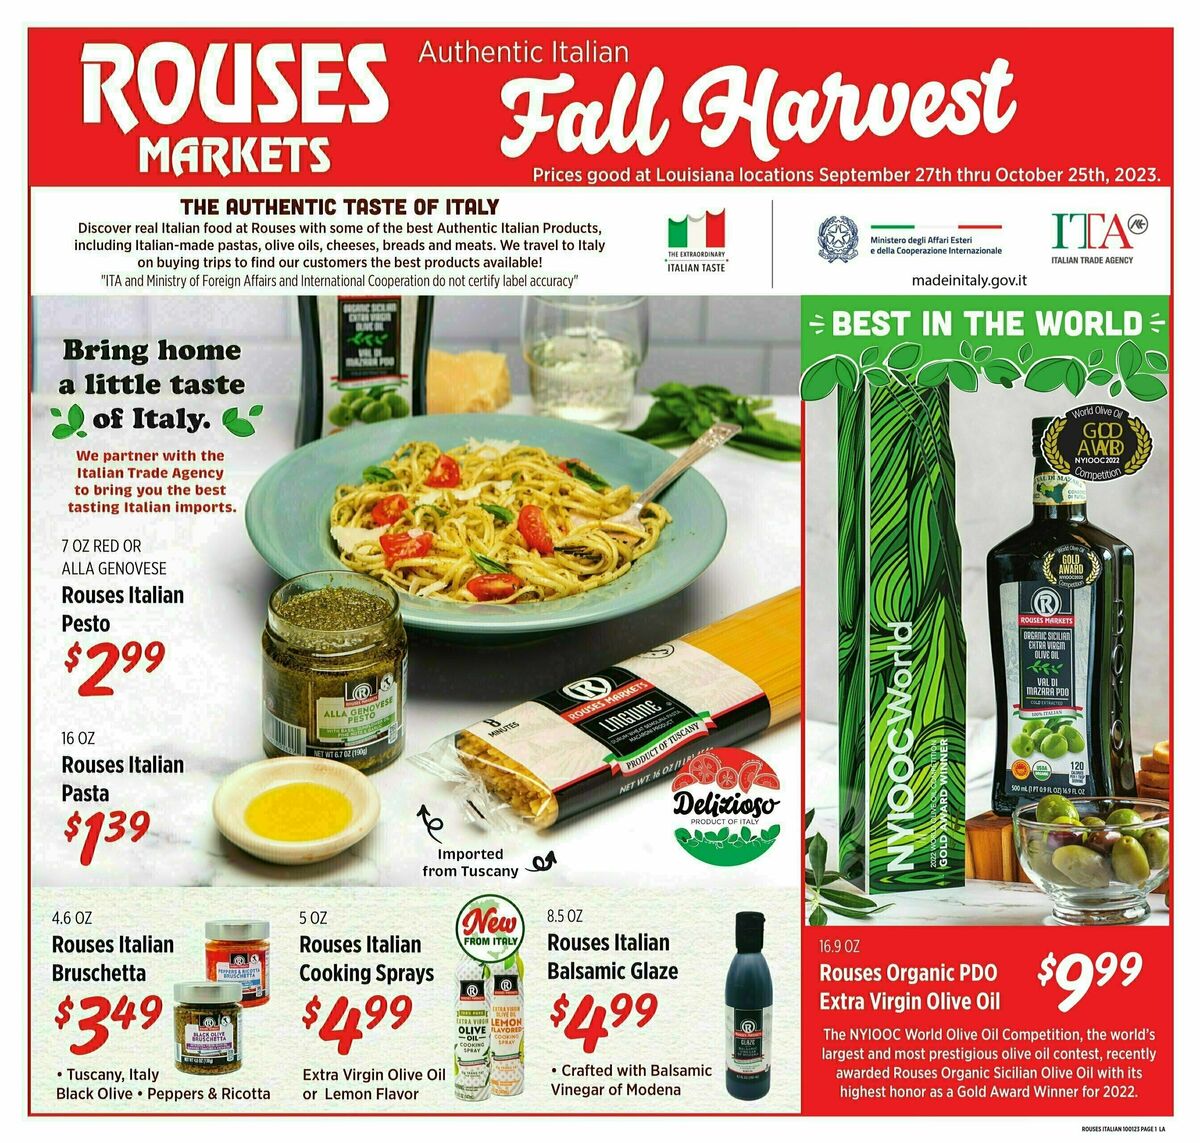 Rouses Markets Authentic Italian Weekly Ad from September 27